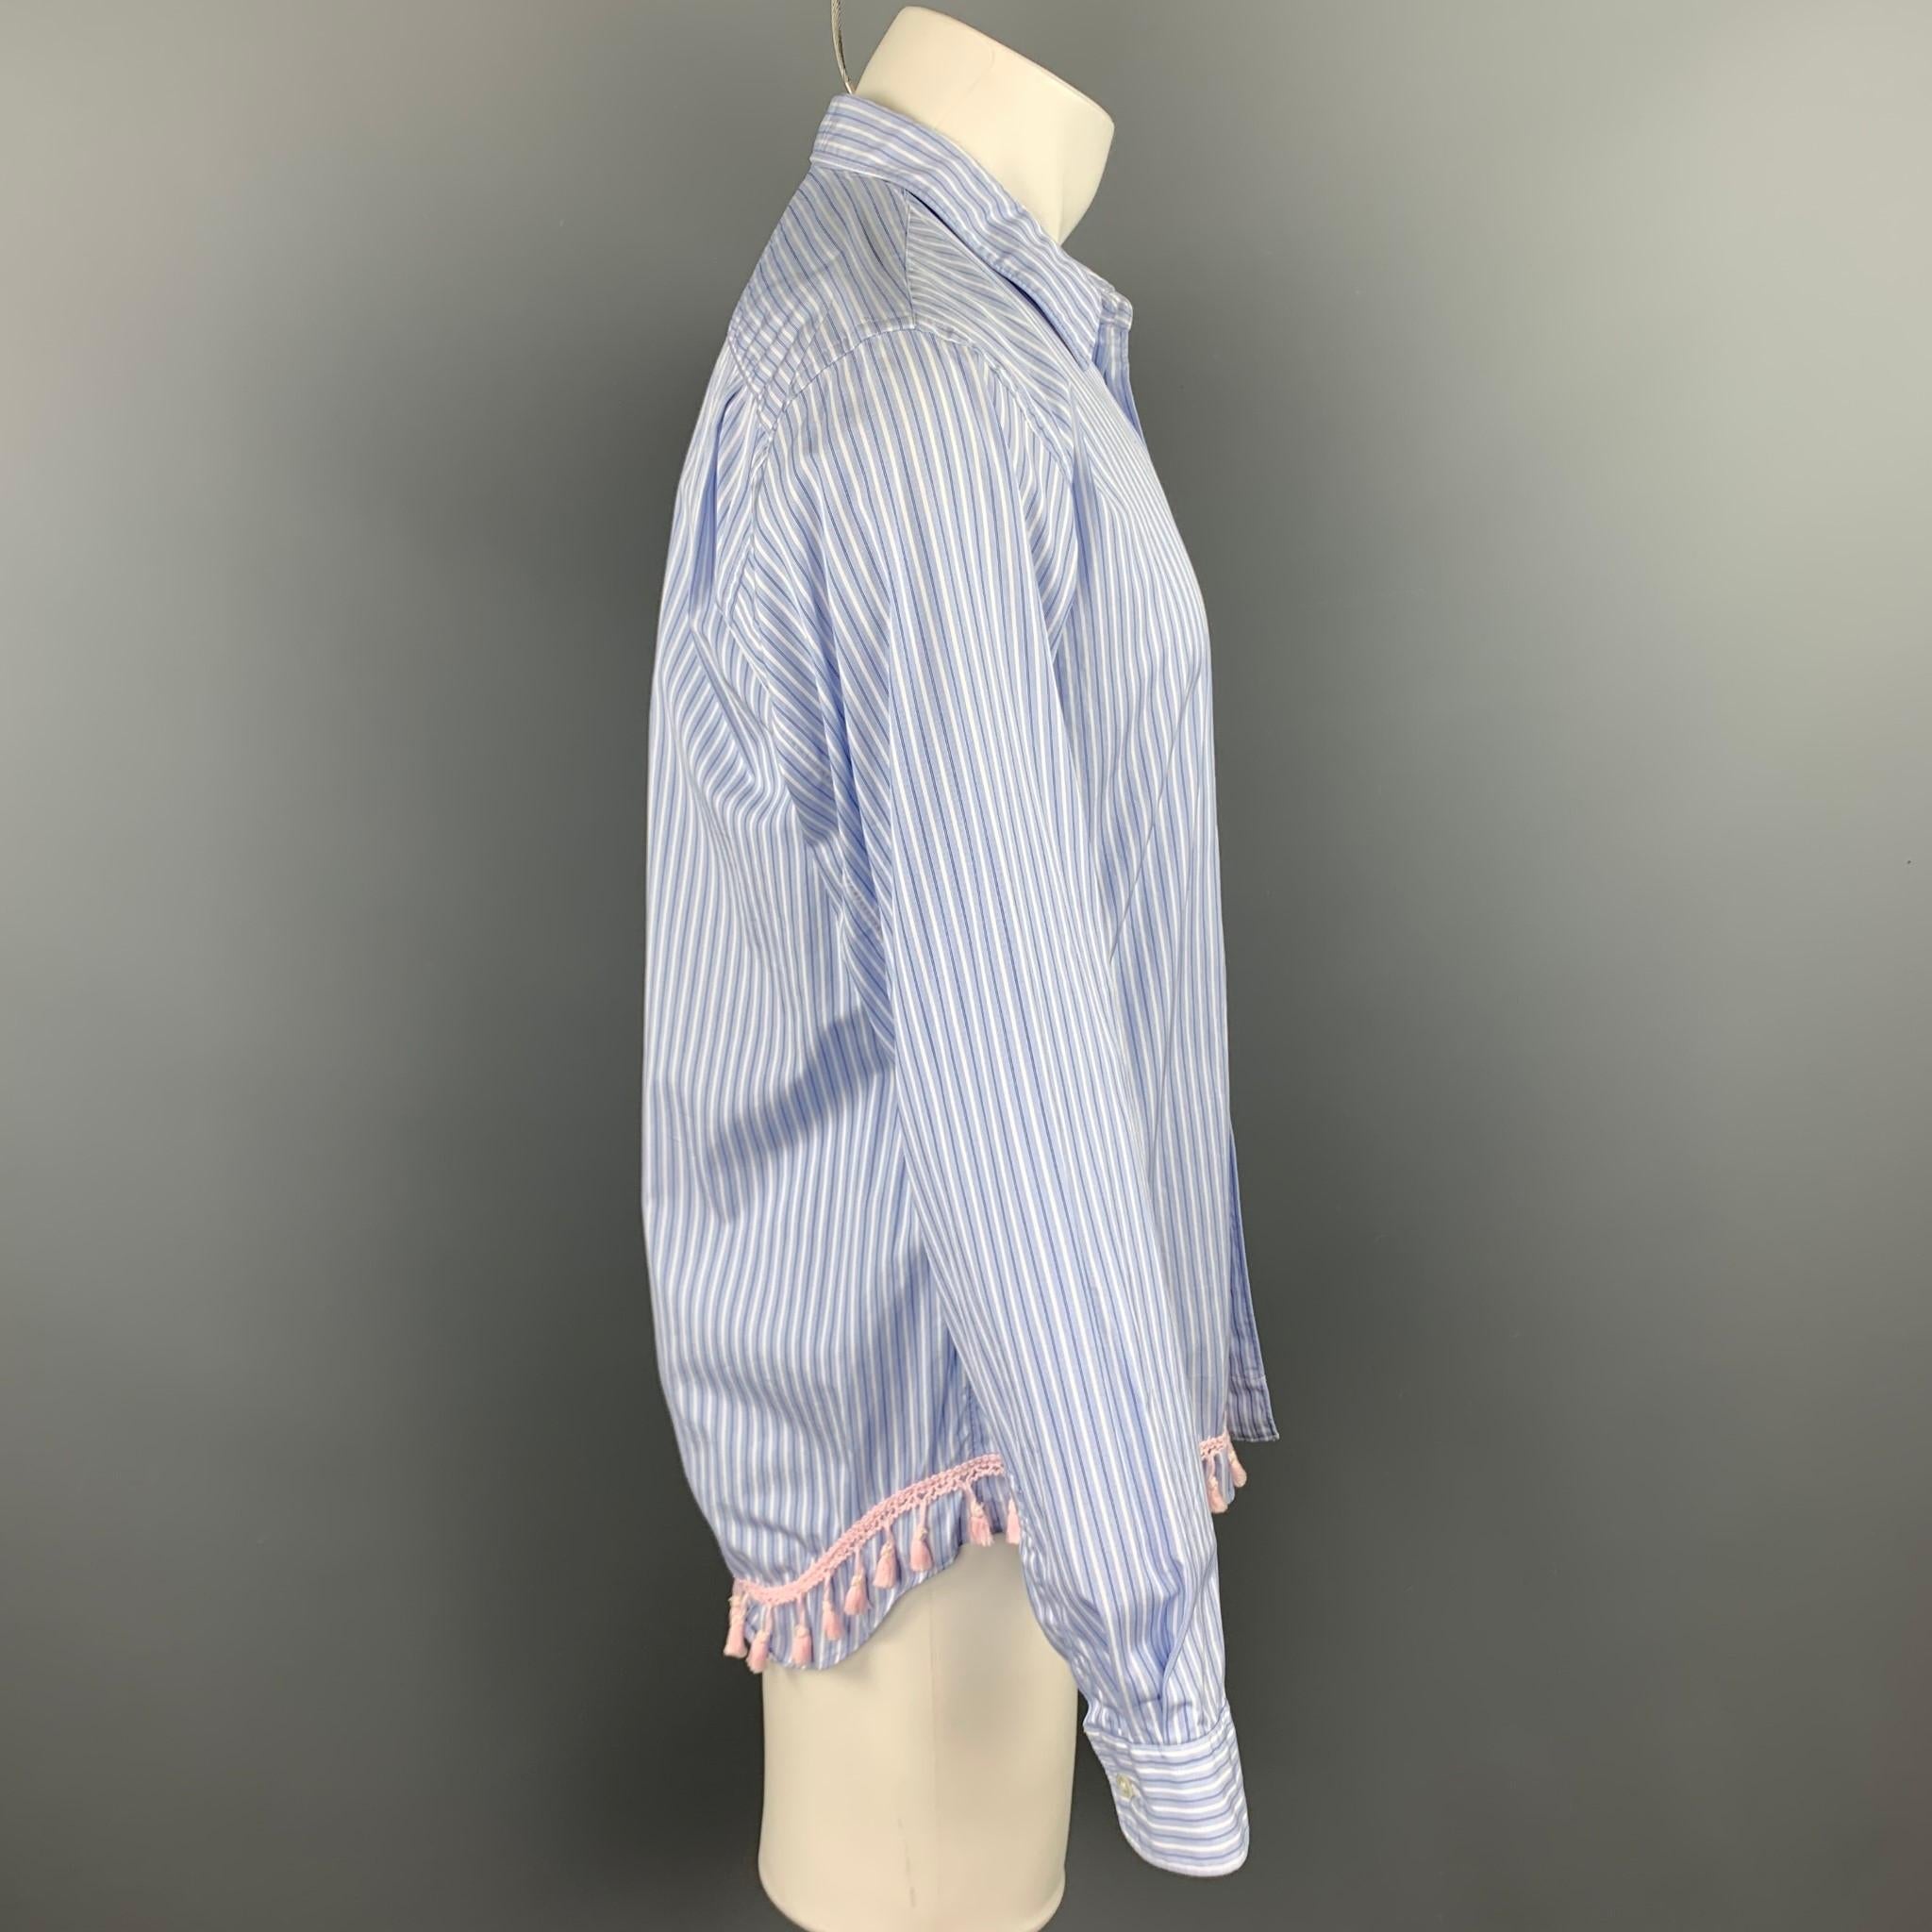 COMME des GARCONS HOMME PLUS long sleeve shirt comes in a blue stripe cotton with a pink fringe trim featuring a button up style, front pocket, and a spread collar. Made in Japan.

Very Good Pre-Owned Condition.
Marked: M / AD